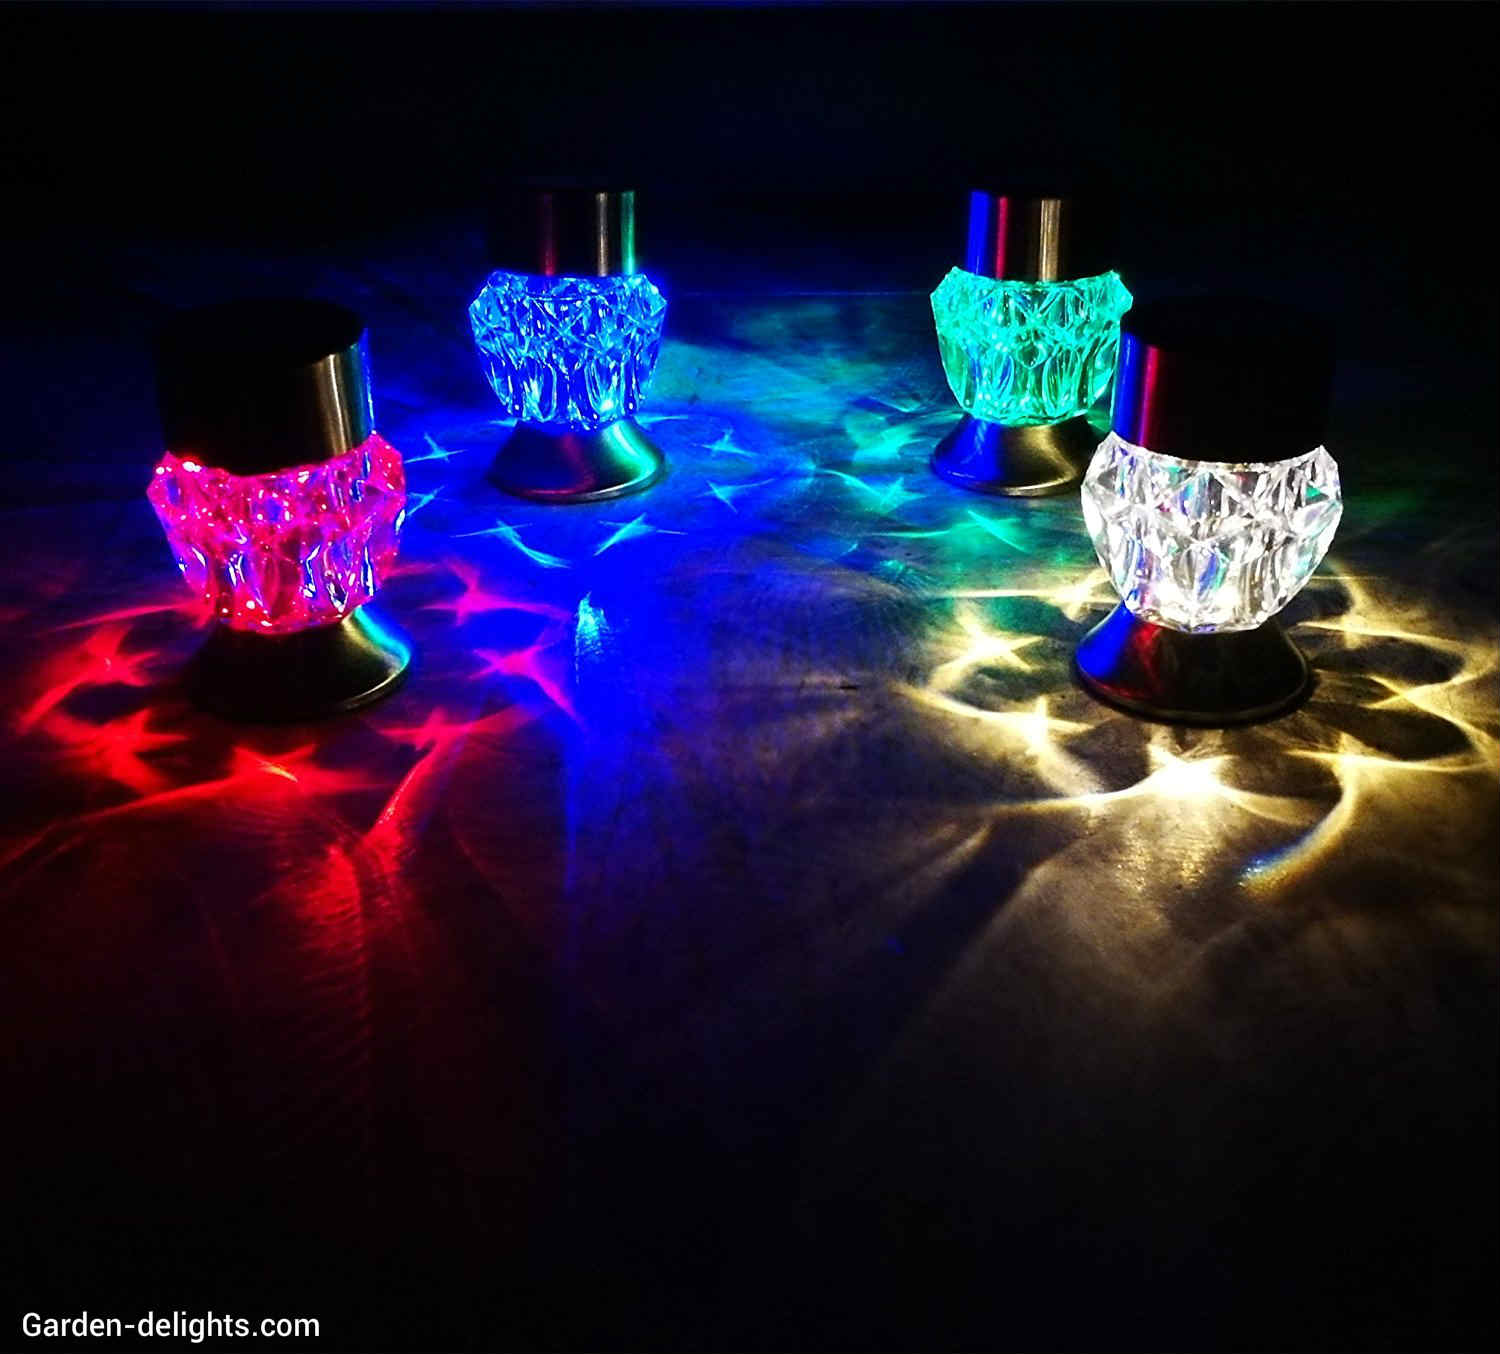  tabletop outdoor multicolored, white, green, blue, red, crystal solar lights on patio table at night, decorative lanterns, large, extra large outdoor lanterns, outdoor lanterns for patio, Walmart.